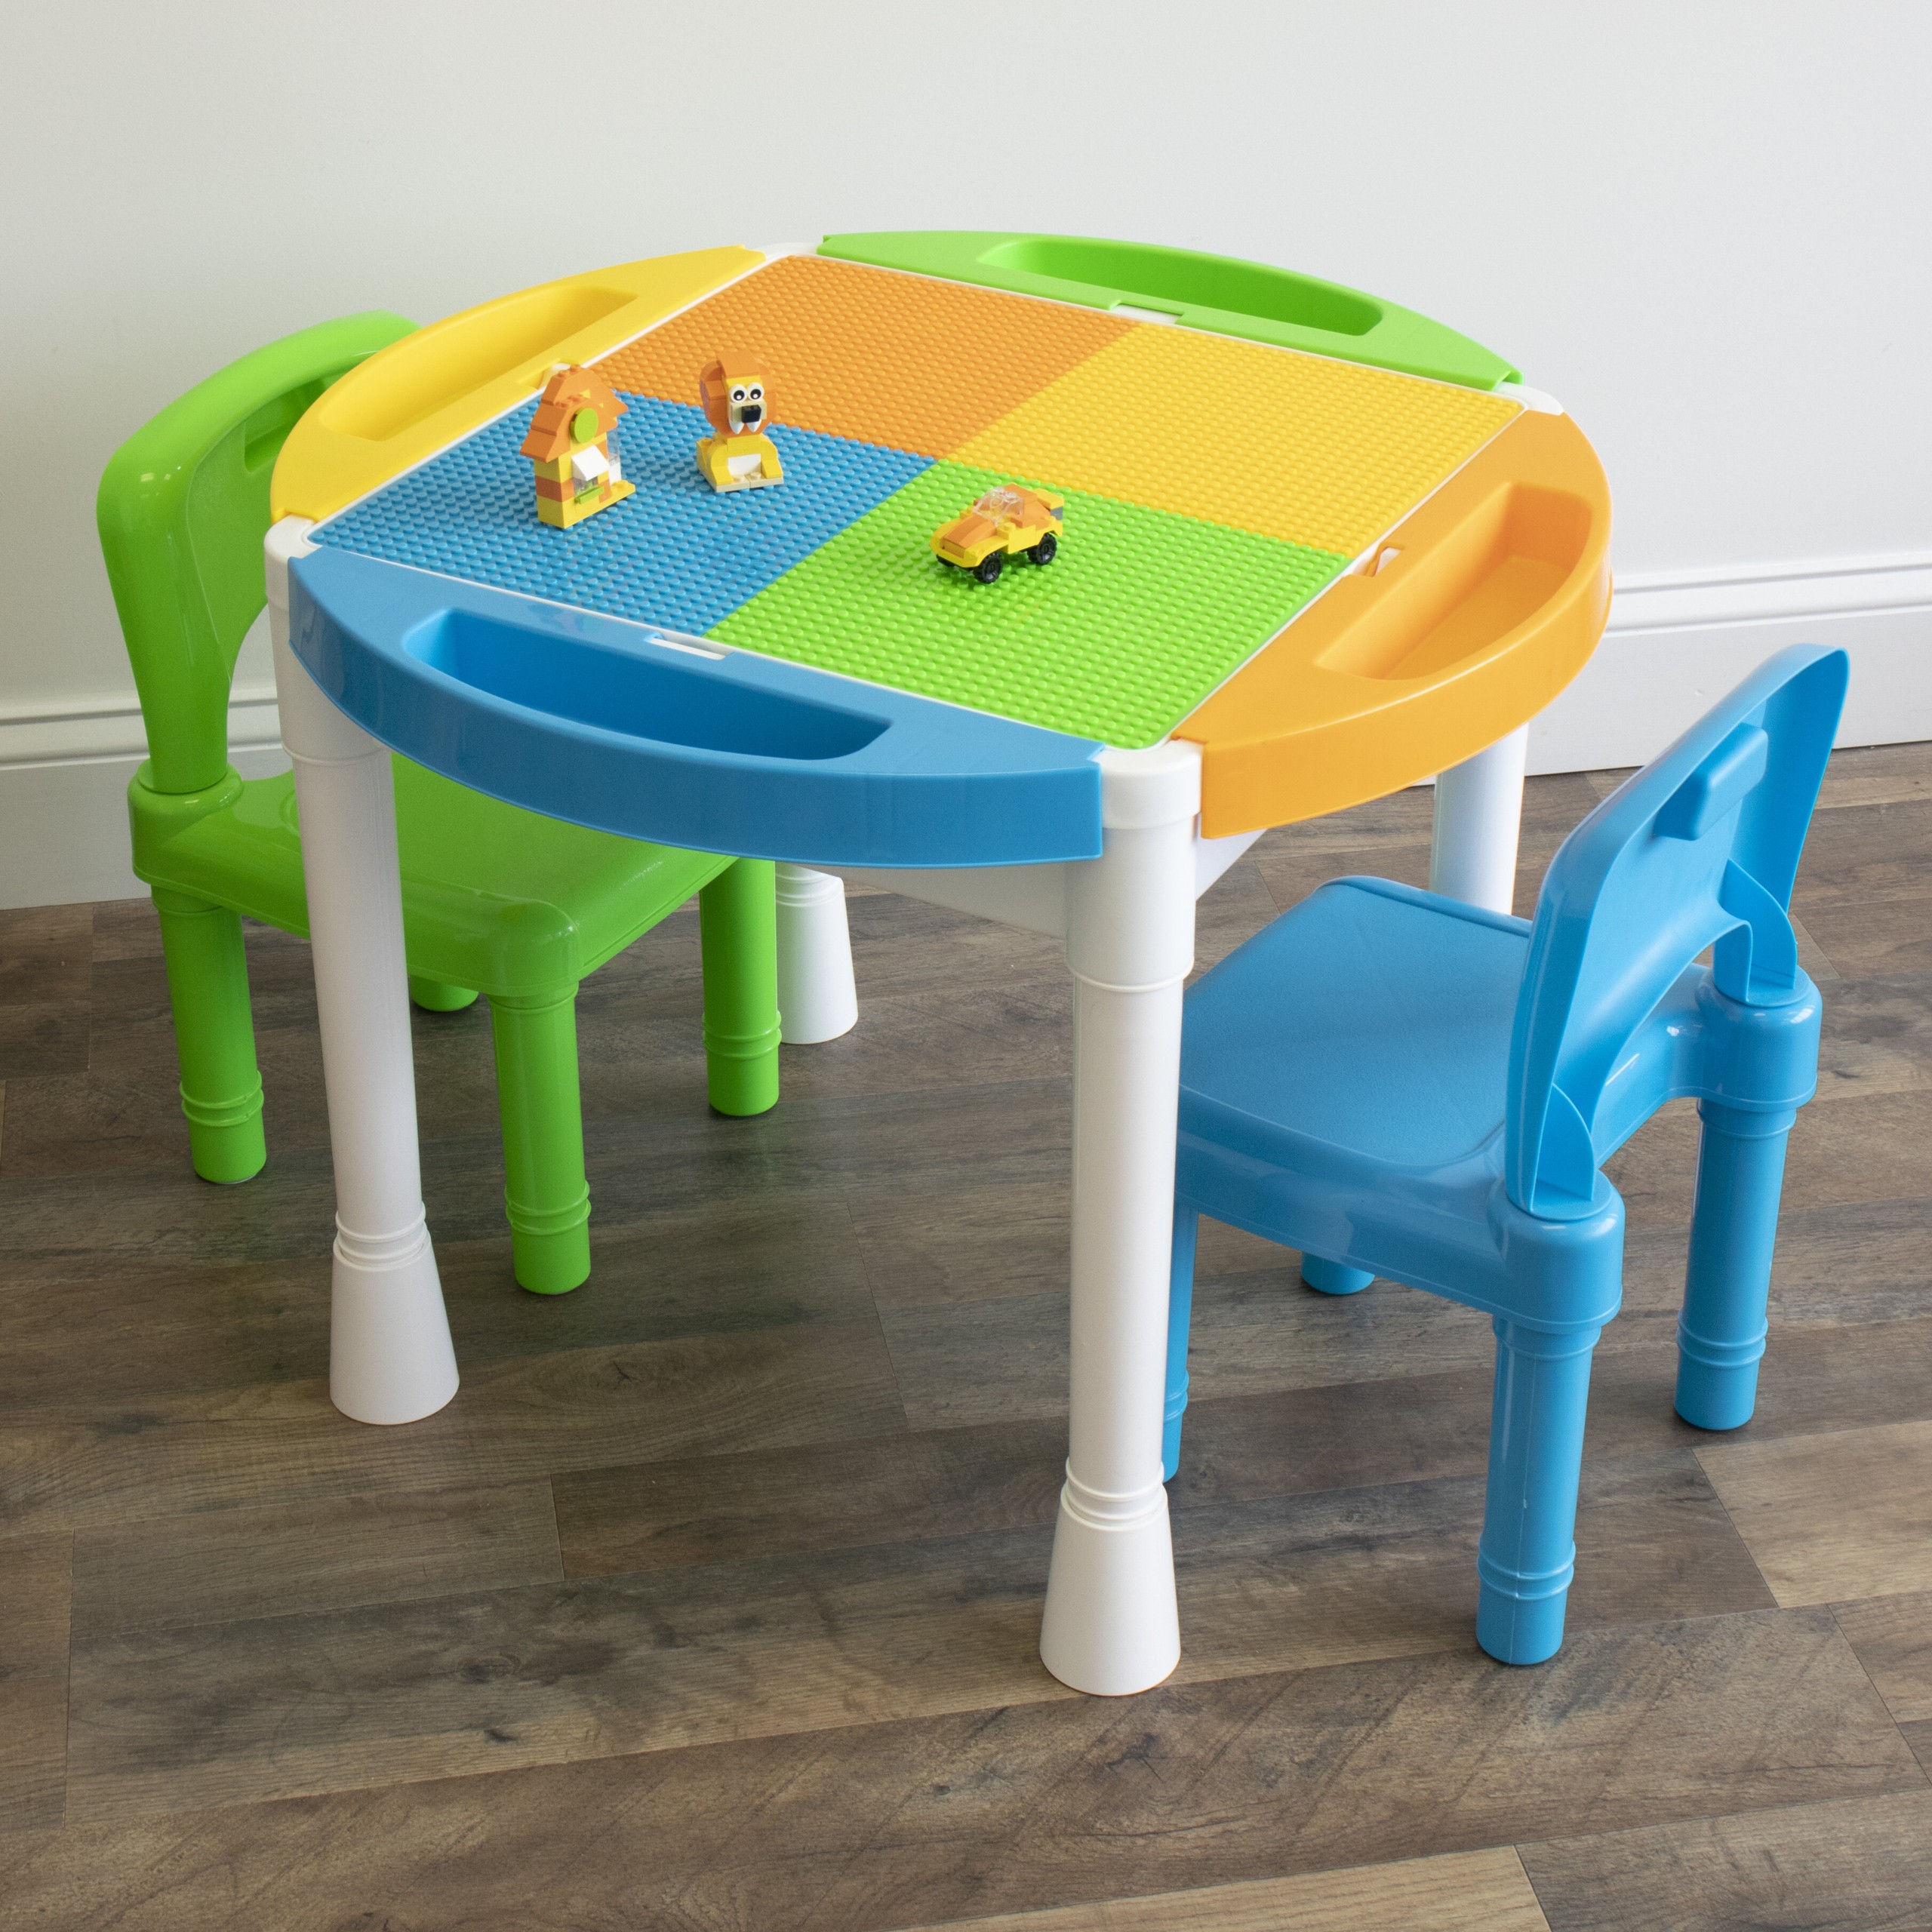 Kids 2-in-1 Plastic Building Blocks Compatible 3 Piece Circle Activity Table & 18" H Chair Set